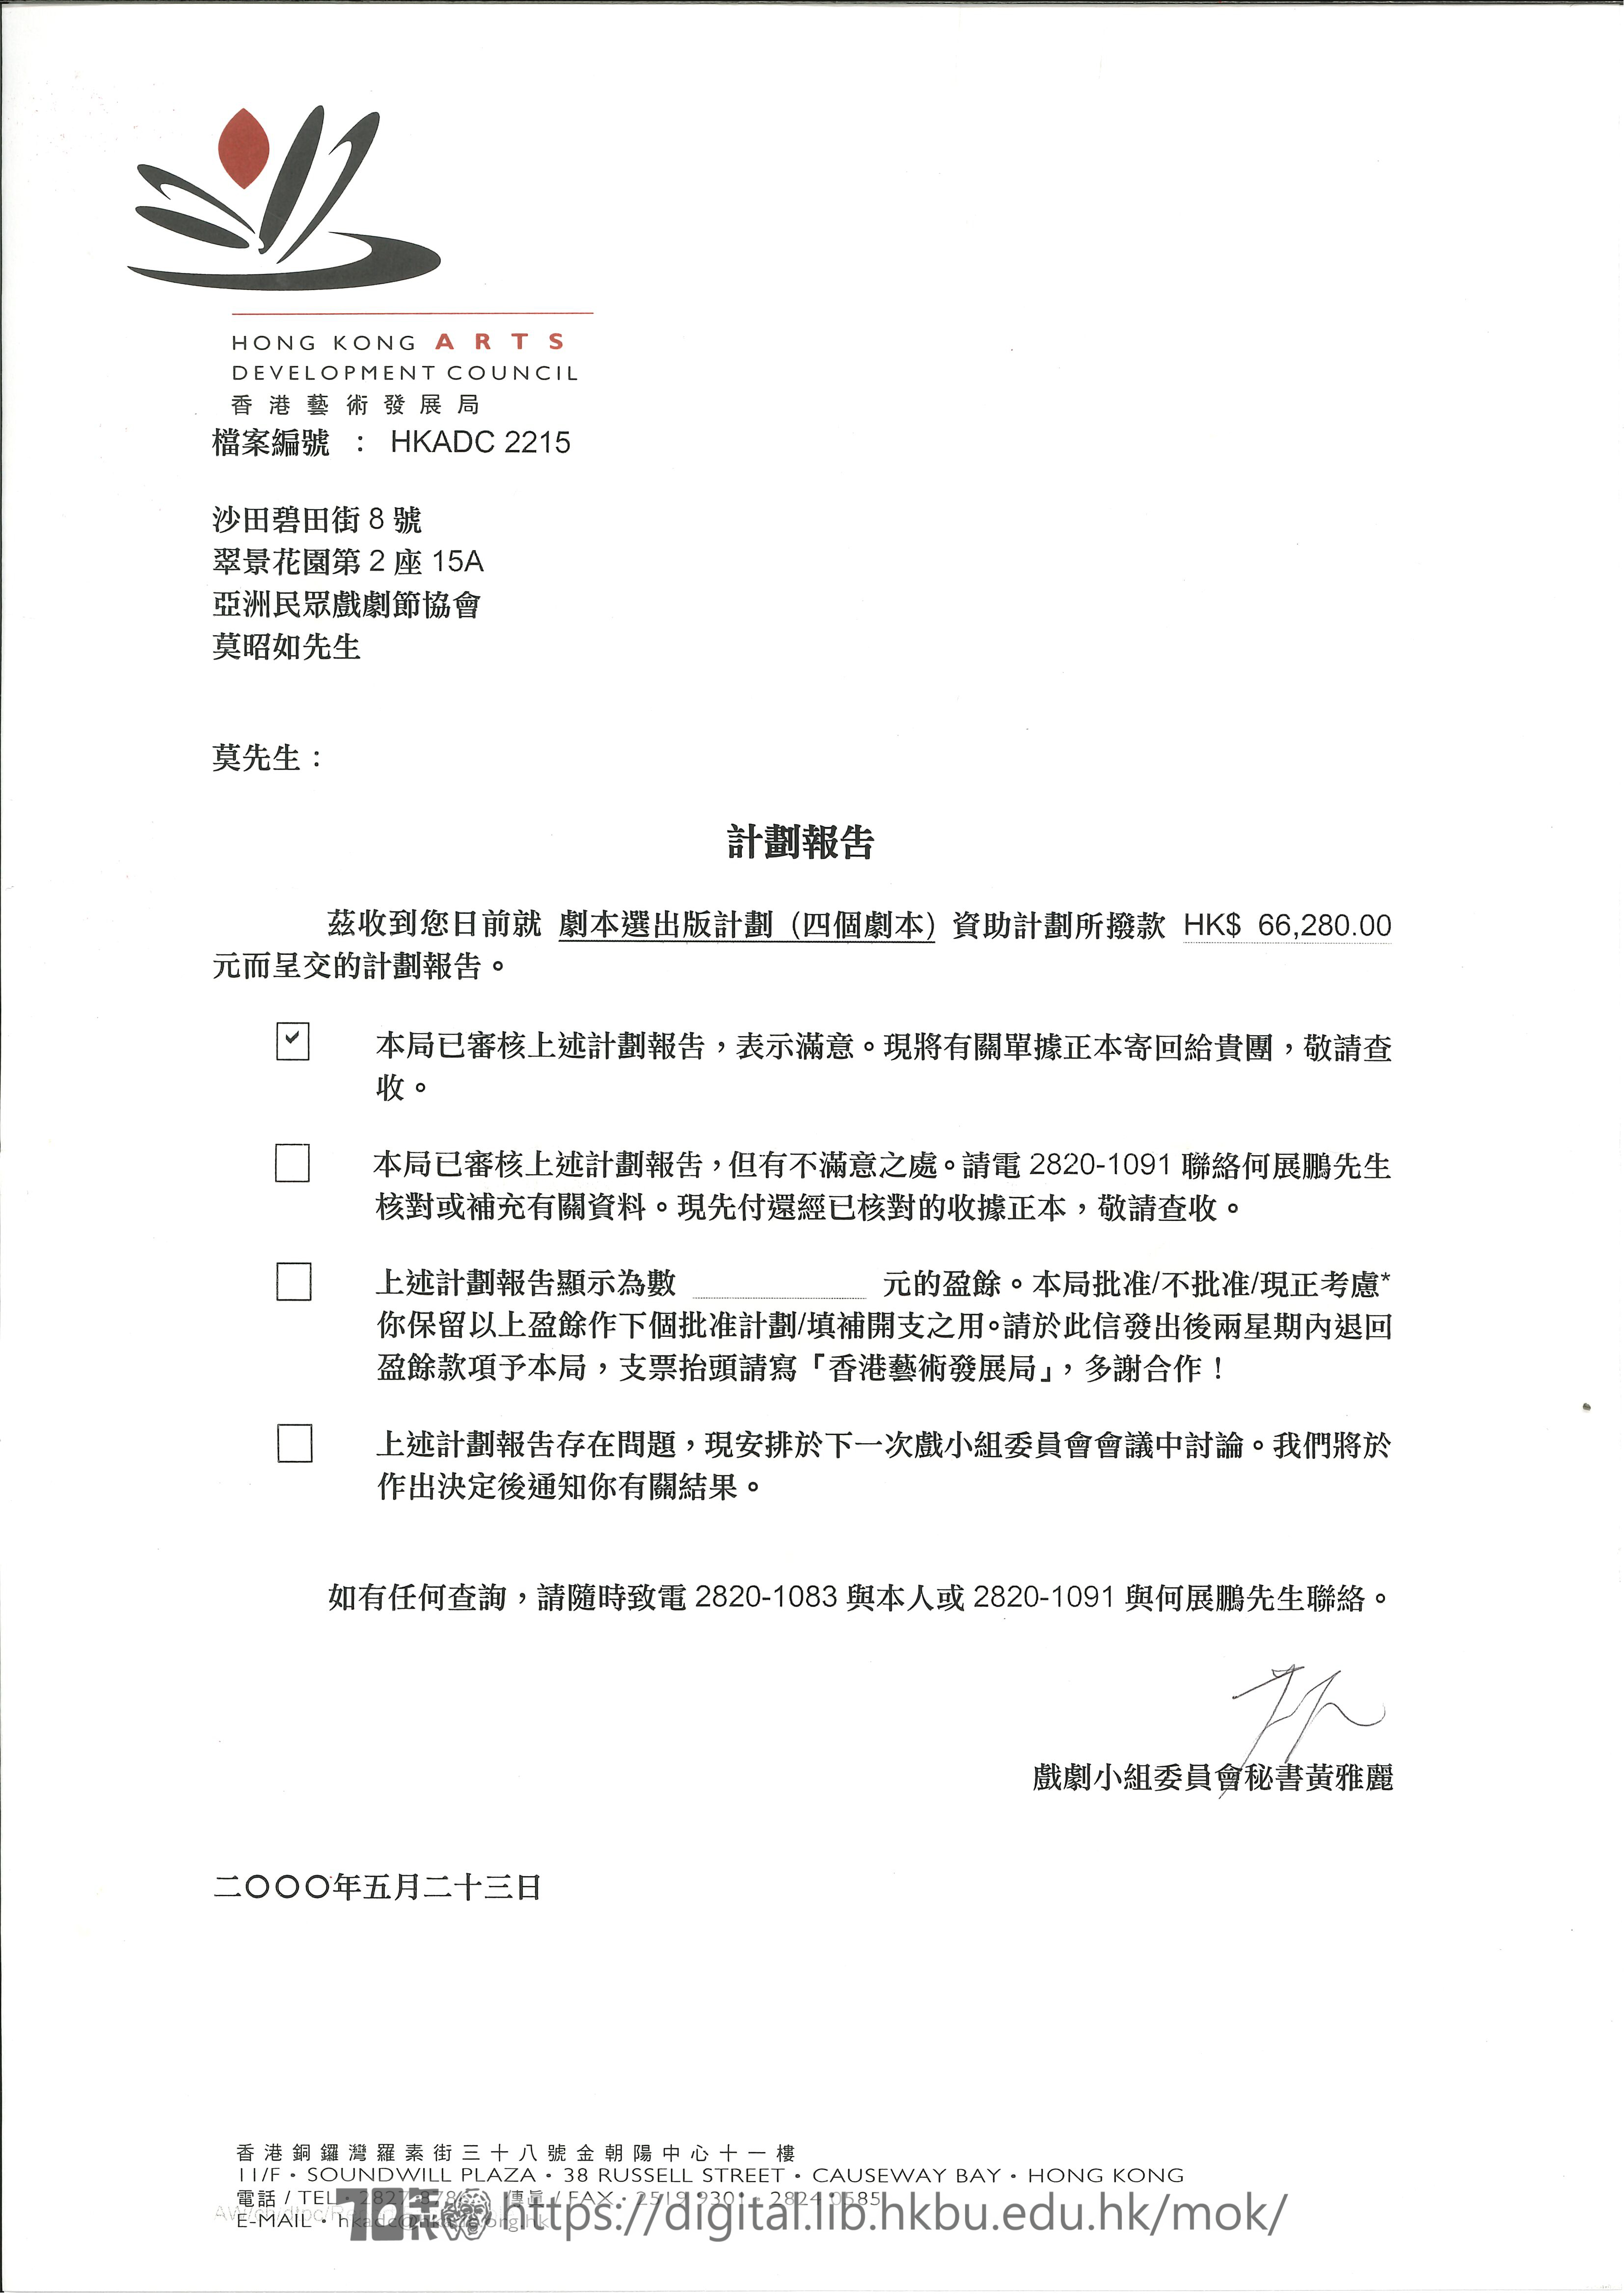 Big Wind  Reply from Hong Kong Arts Development Council about a project report  